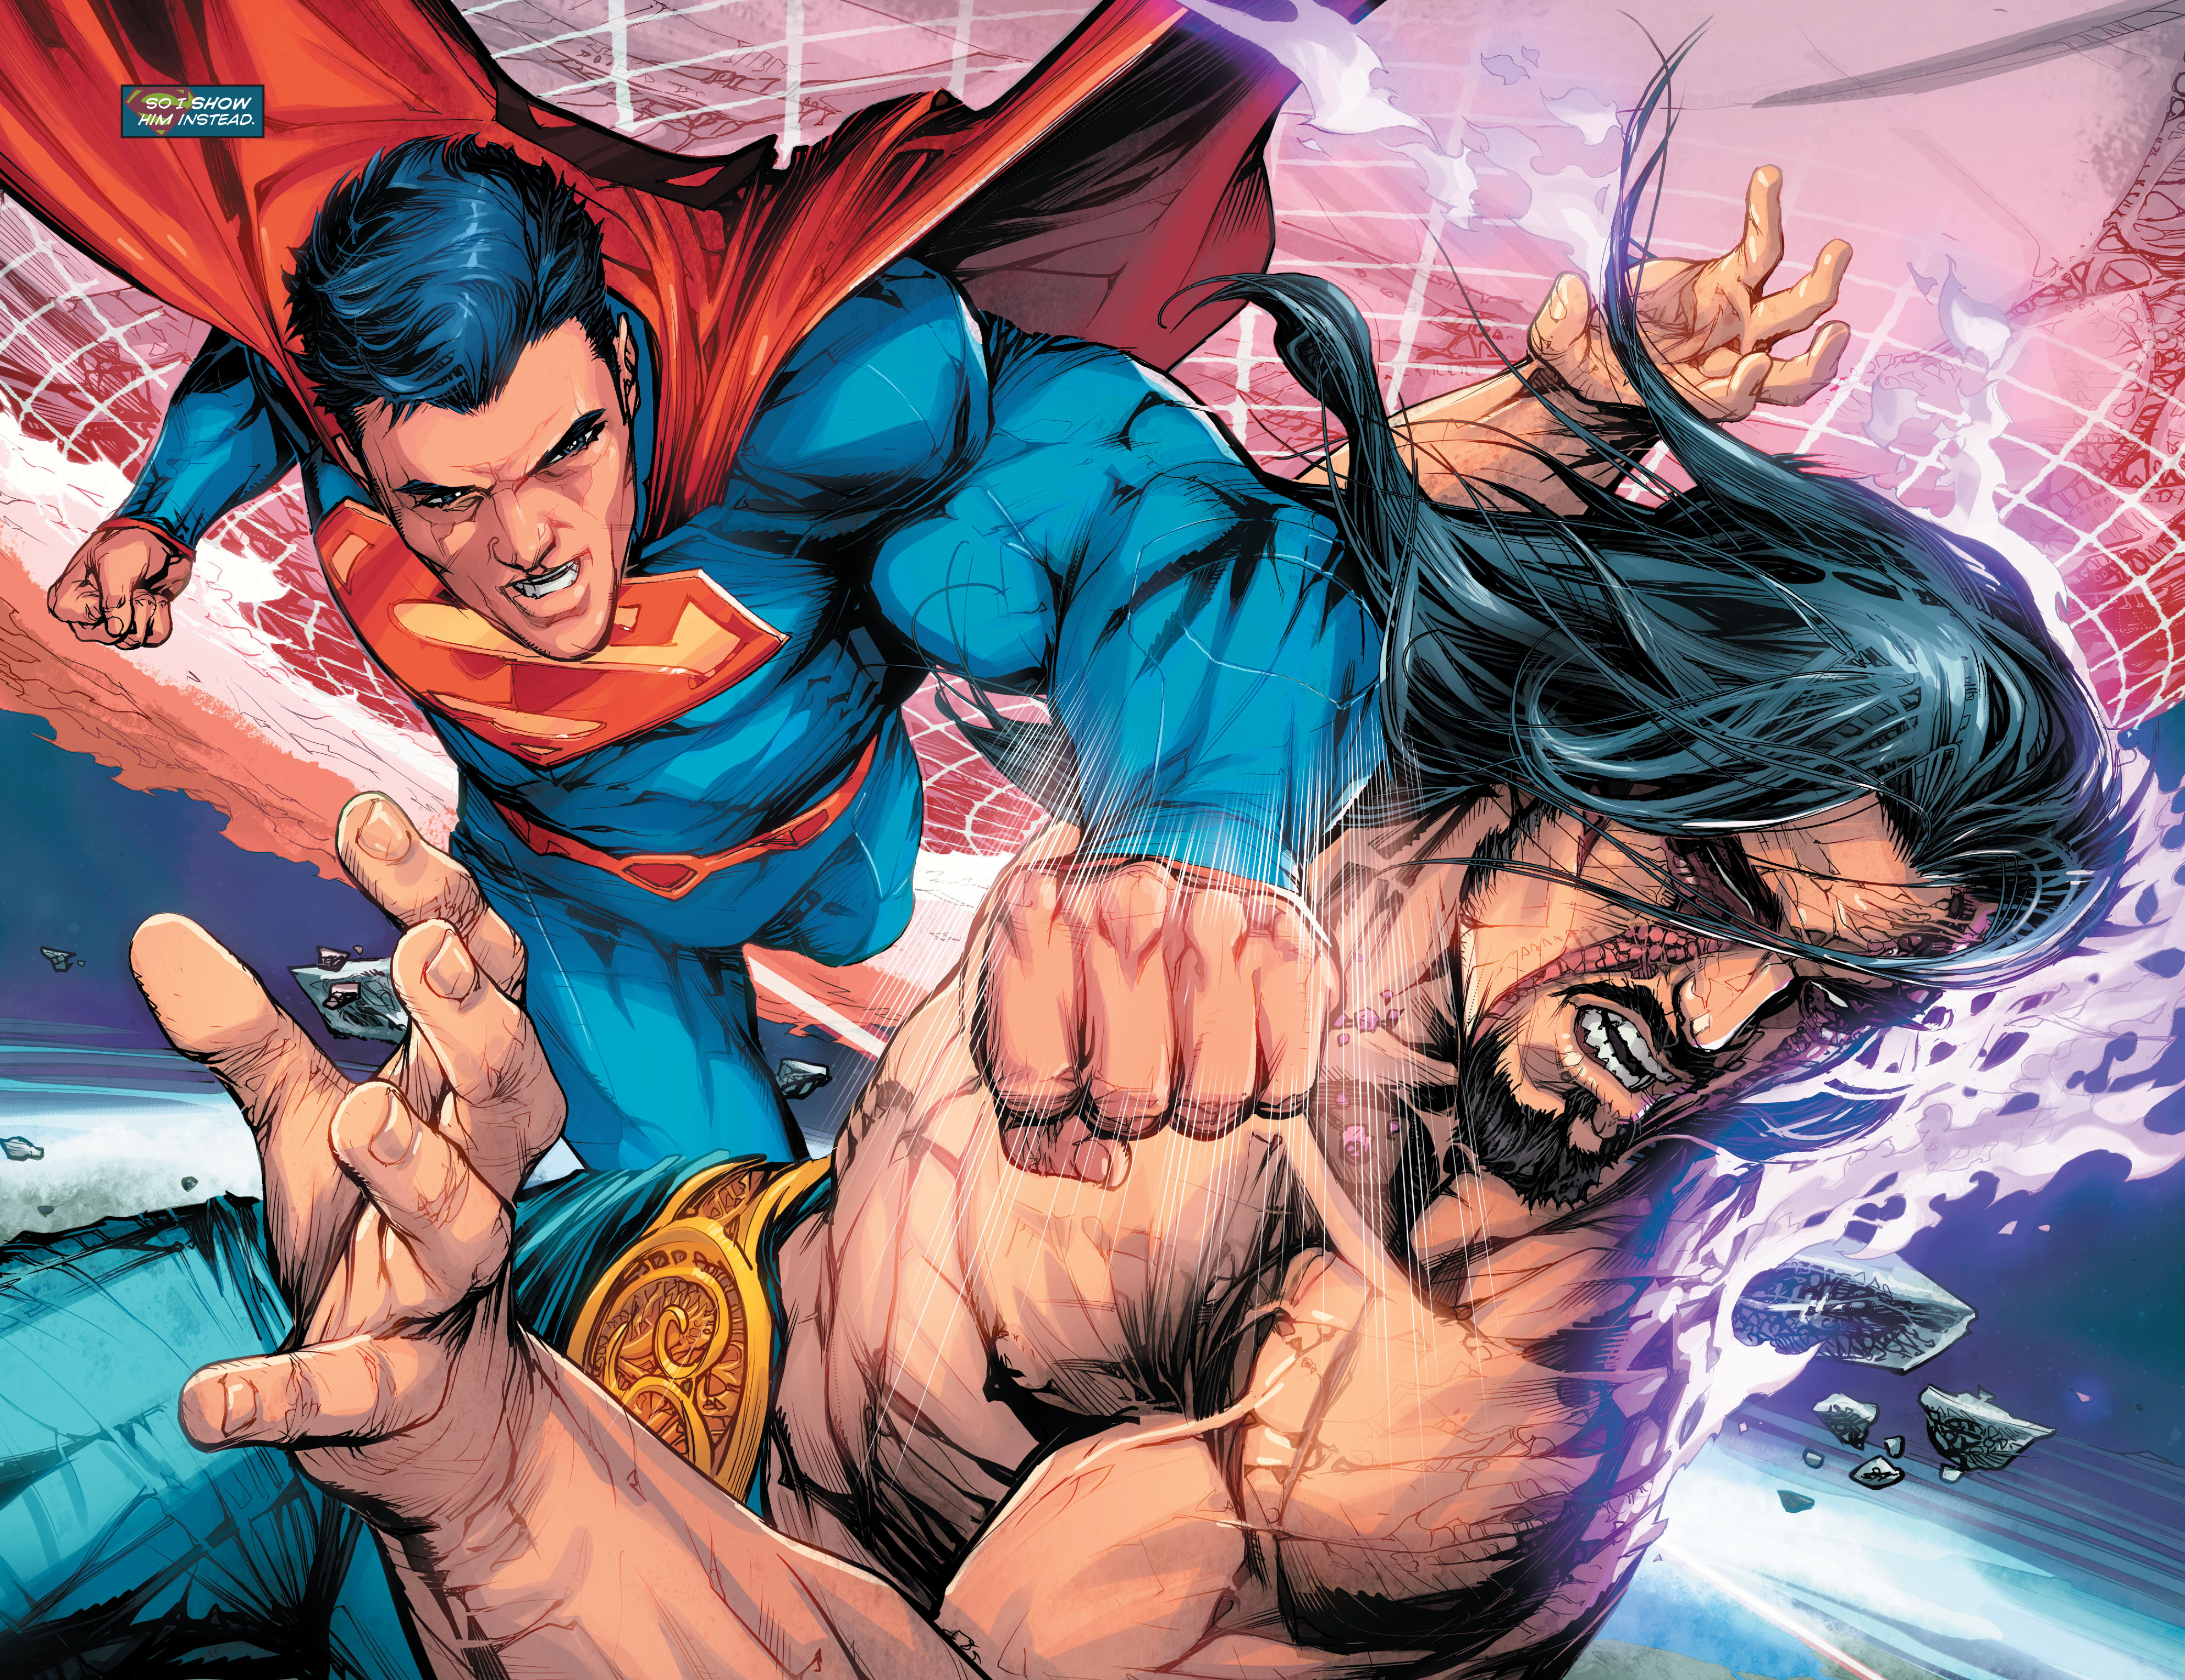 If Superman had punched Vandal back down to Earth, that would've been ...